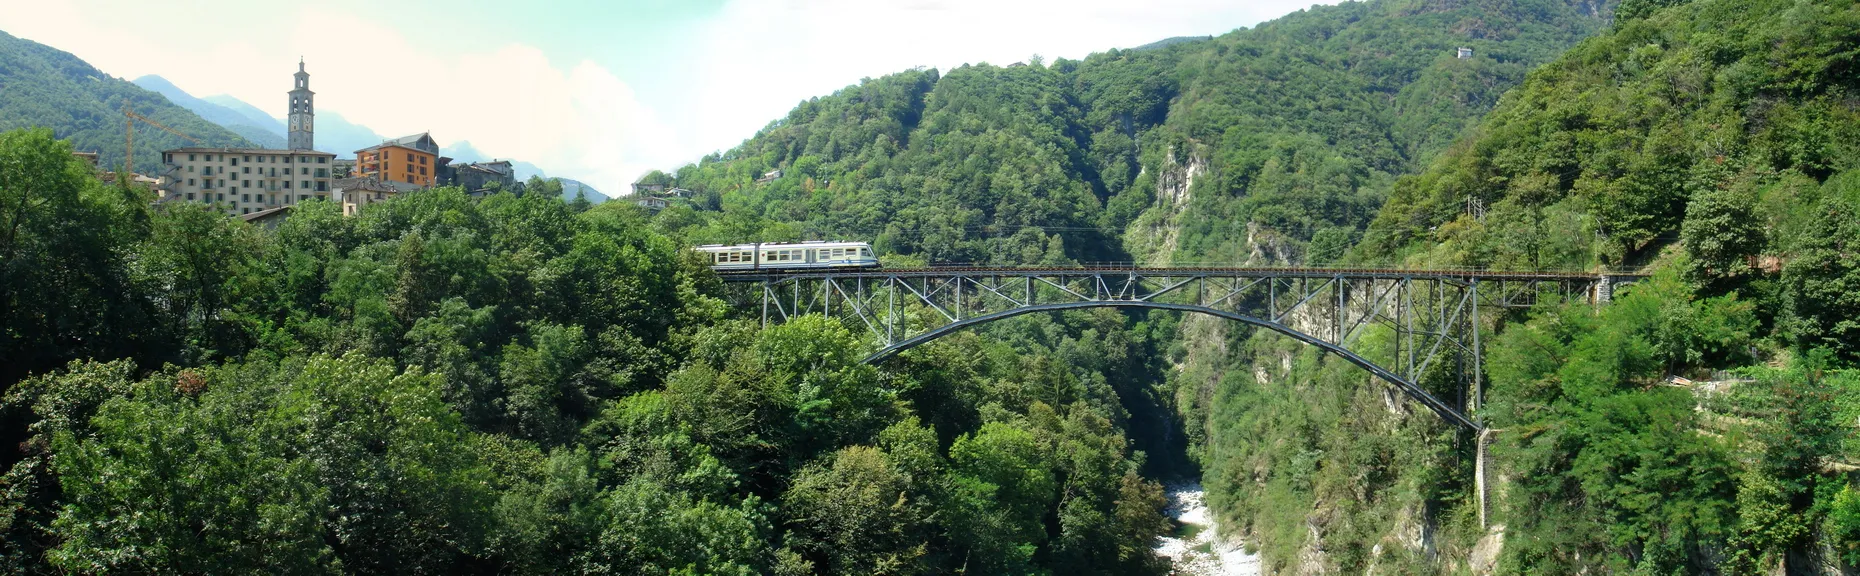 Photo showing: Intragna in Centovalli with train viaduct - panoramic view